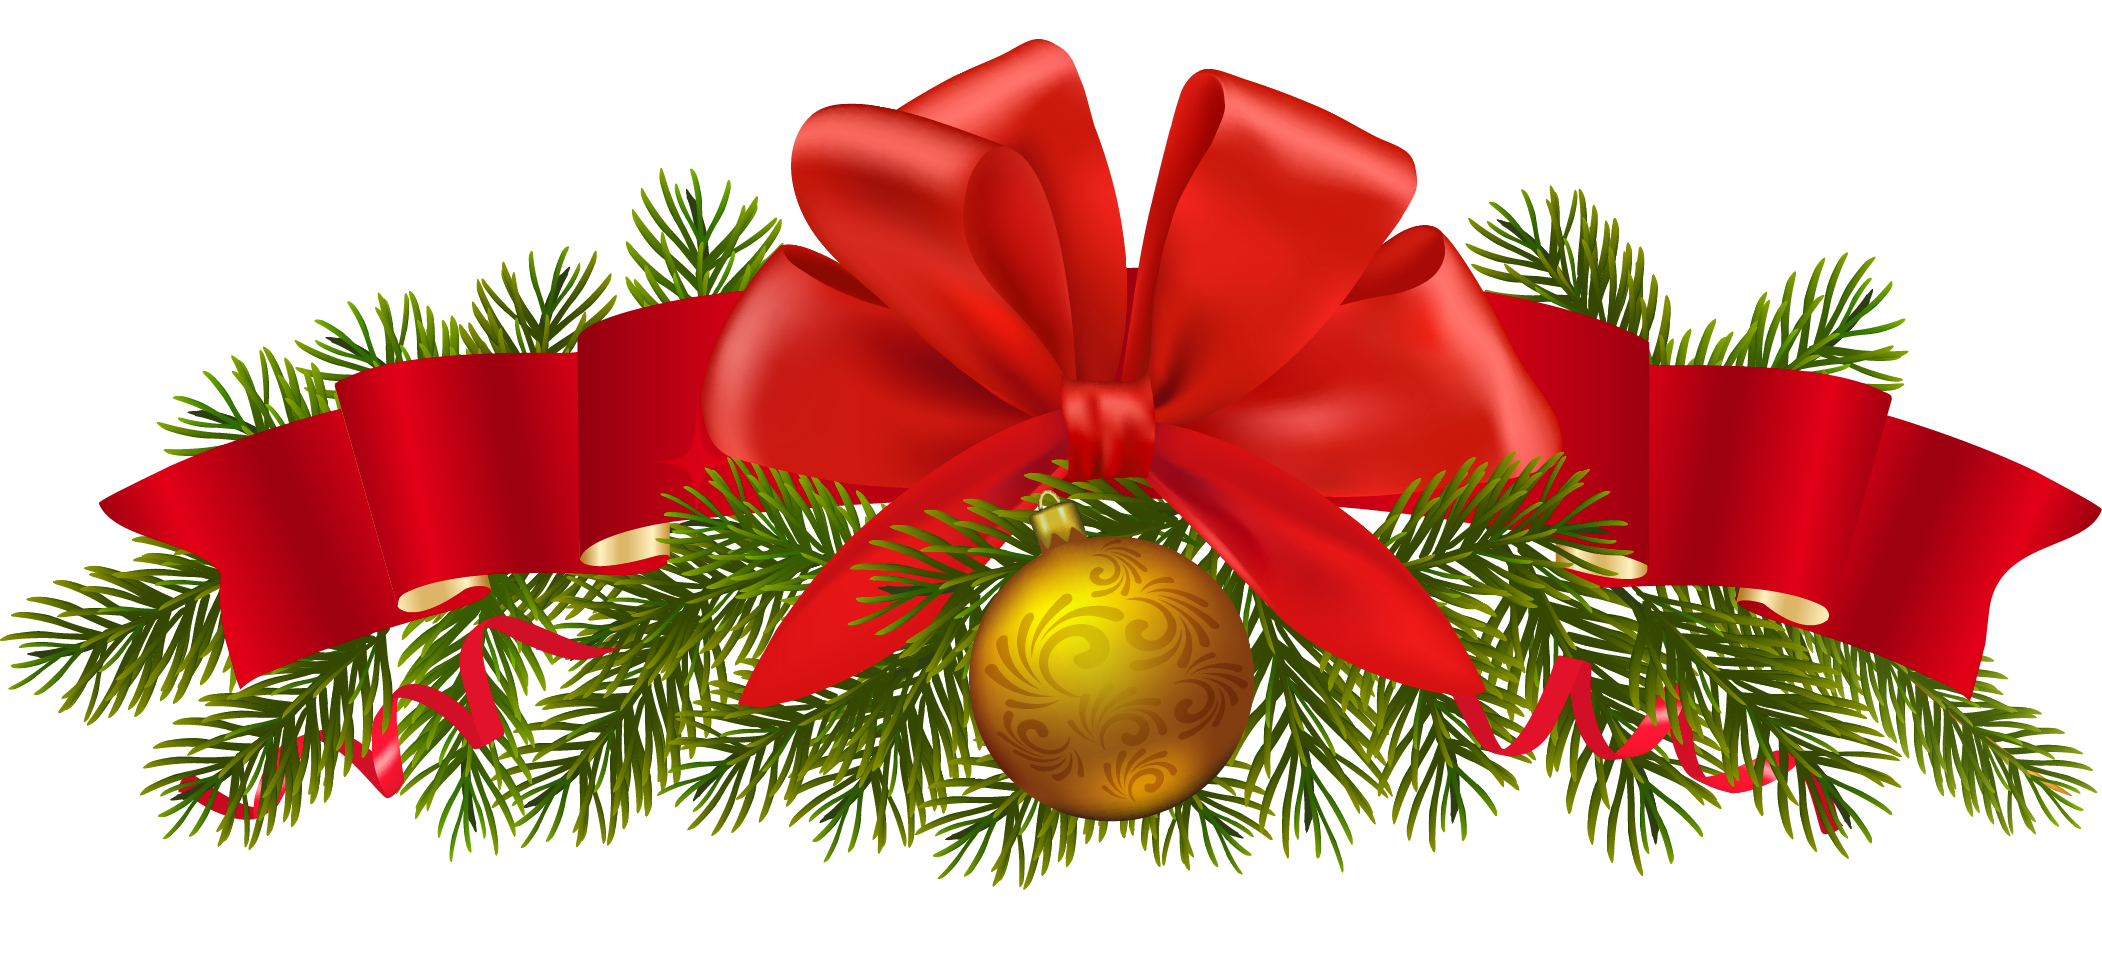 Free Christmas Decorations Cliparts Download Free Clip Art Free Clip Art On Clipart Library